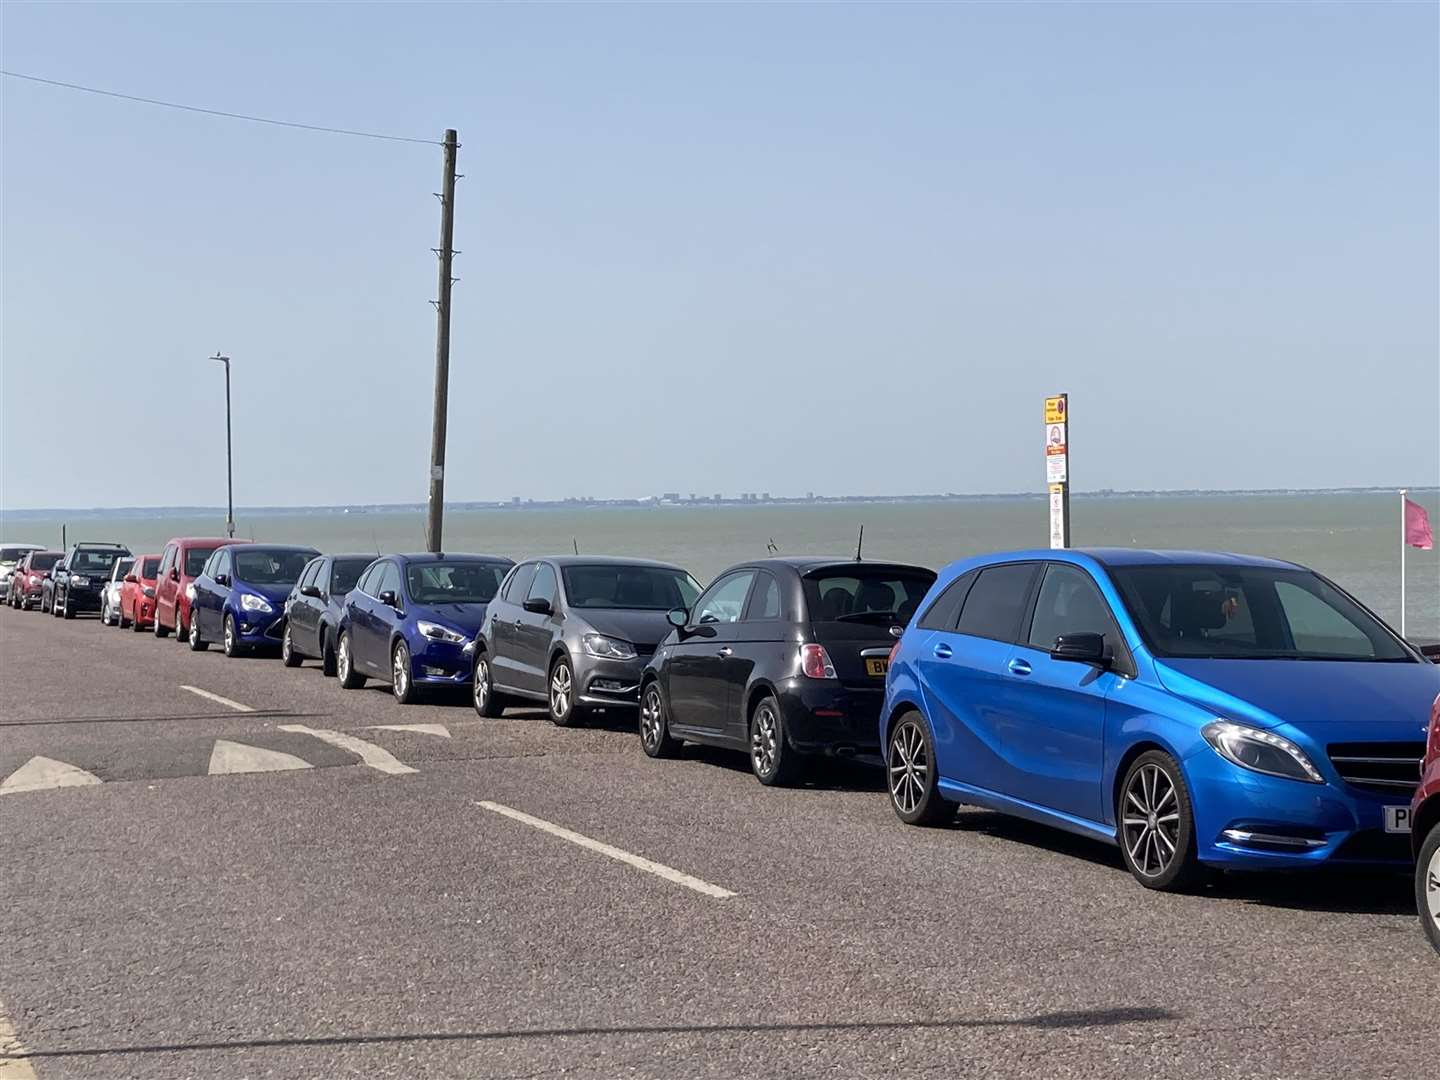 Nose-to-tail cars along The Leas at Minster, on the Isle of Sheppey